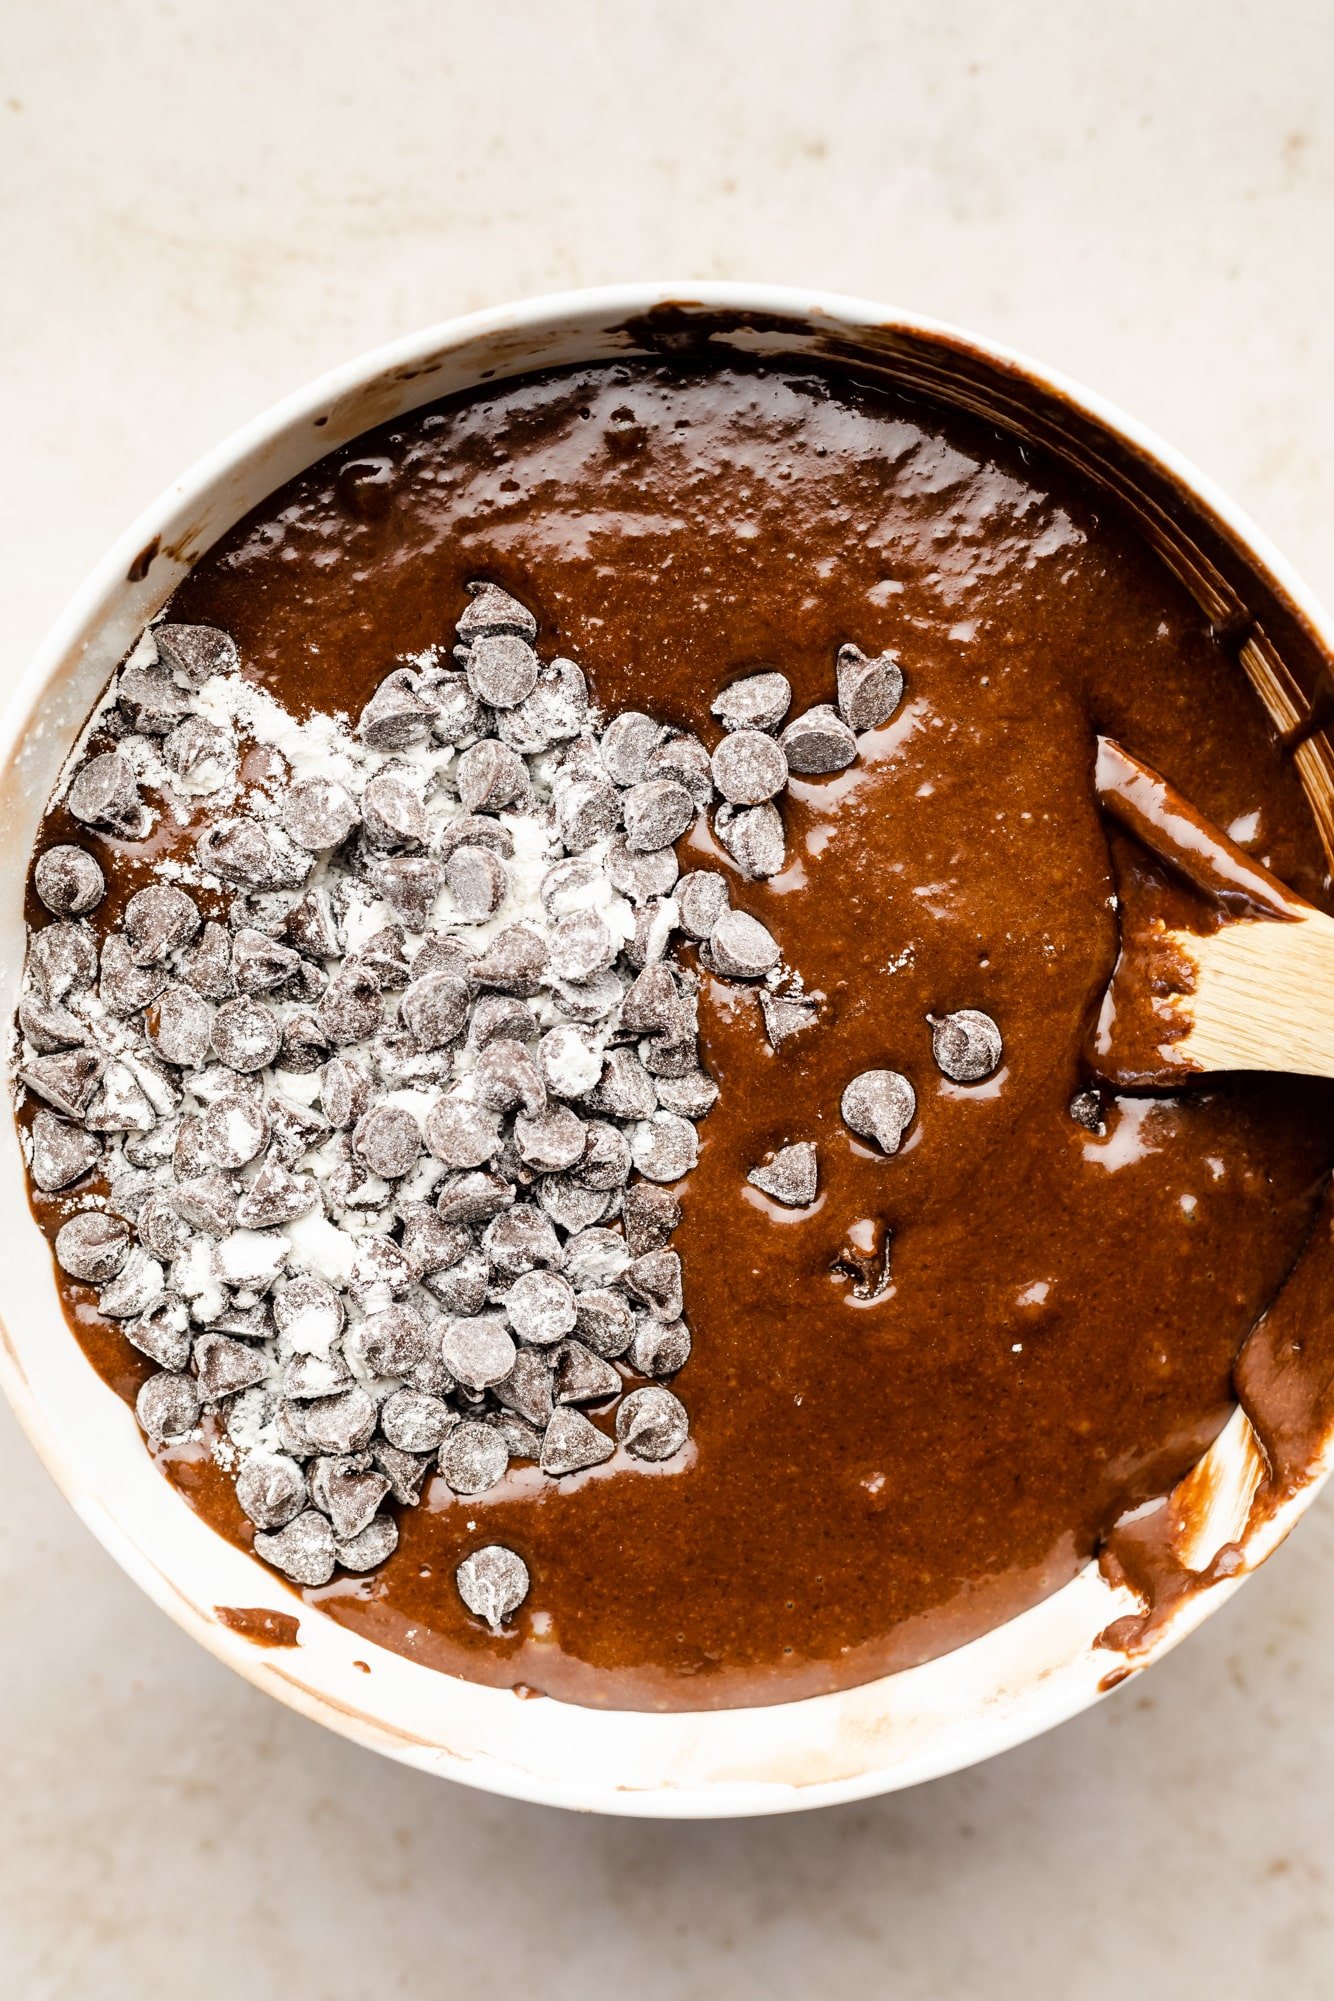 Use a wooden spoon to fold chocolate chips into the chocolate cake batter.